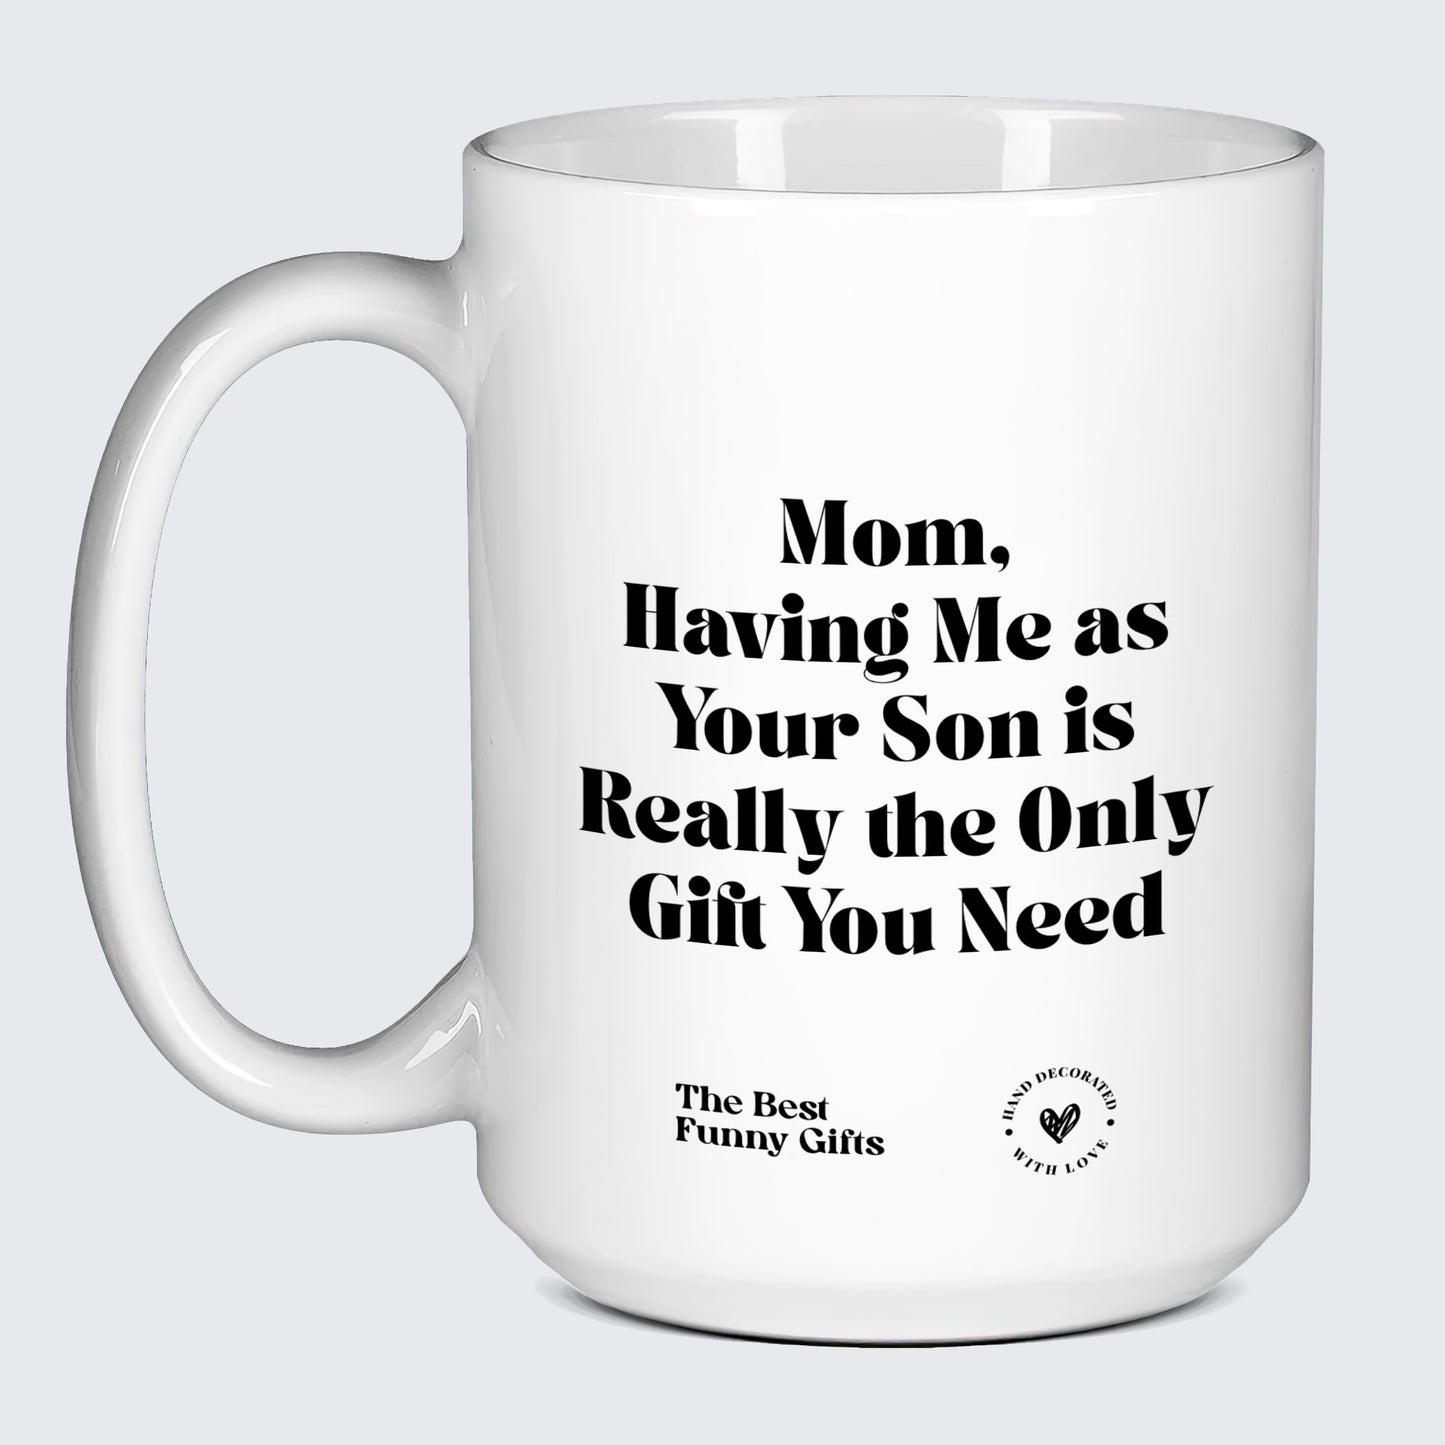 Mugs For Mom Mom, Having Me as Your Son is Really the Only Gift You Need - The Best Funny Gifts